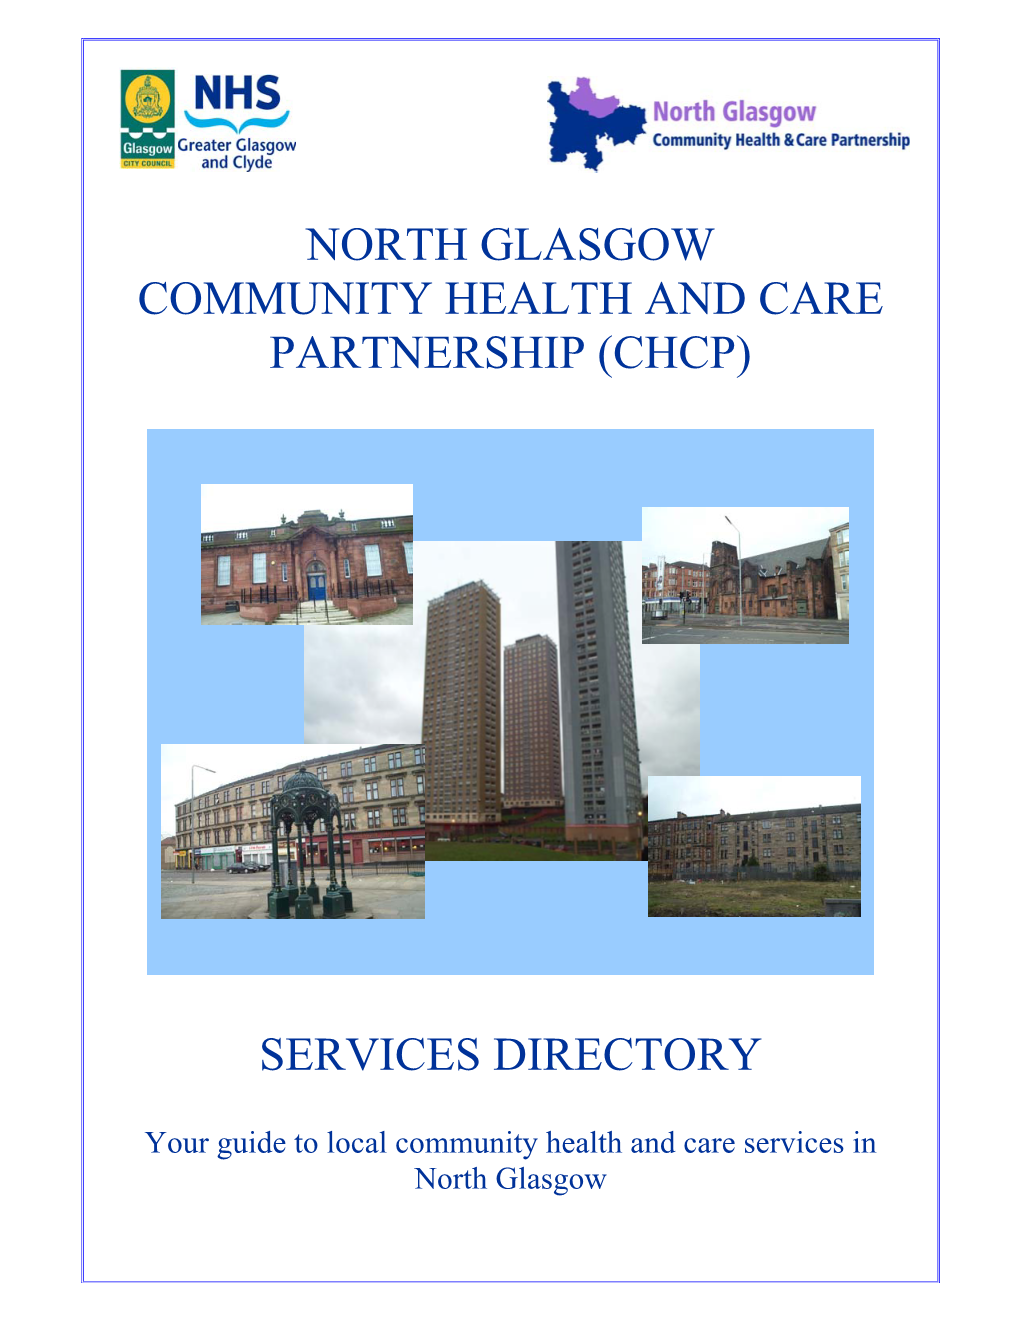 North Glasgow Community Health and Care Partnership (Chcp) Services Directory